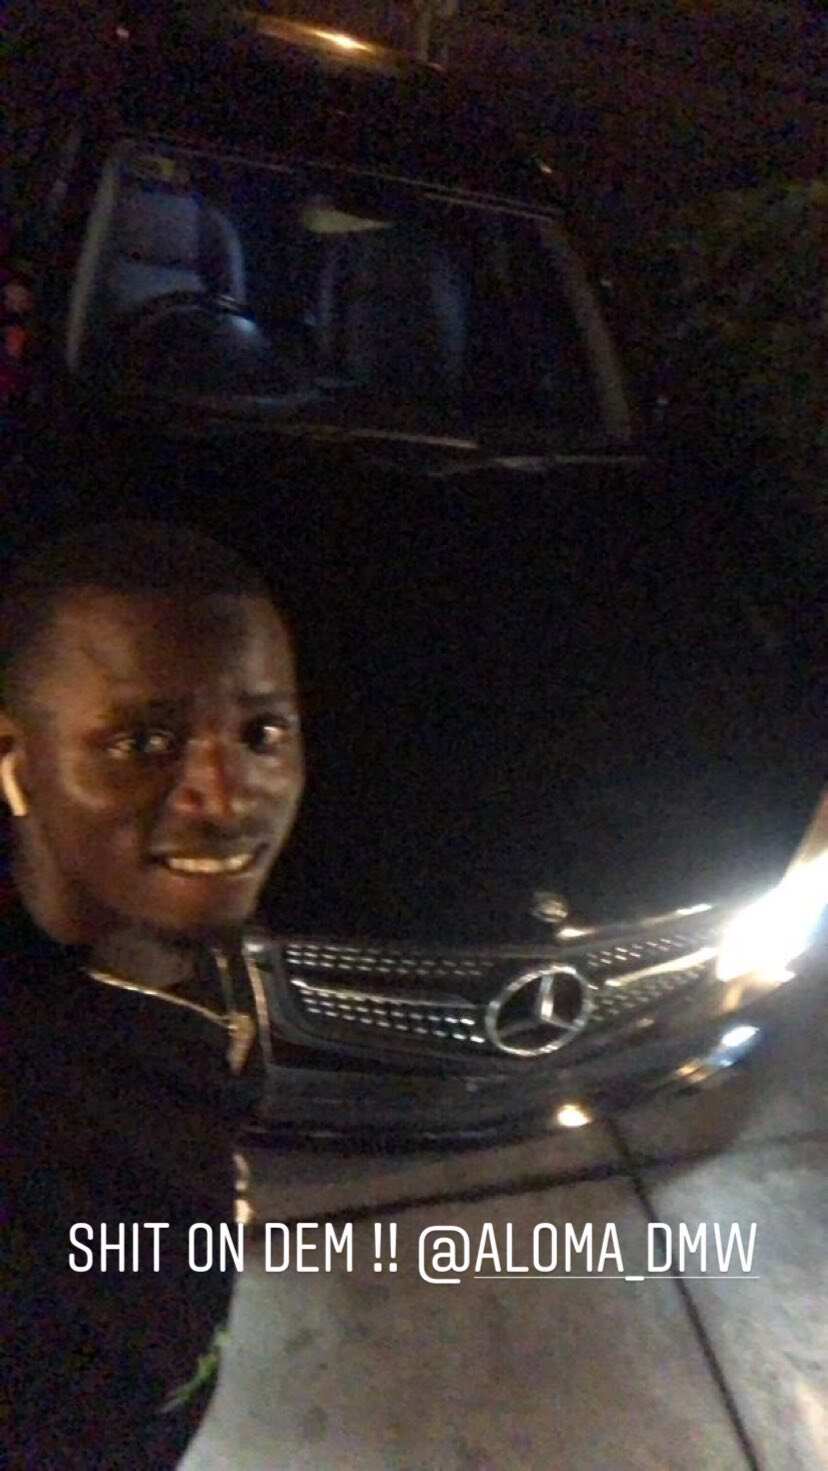 Davido gifts out Benz to one of his crew members, vows to buy cars for the rest of the team